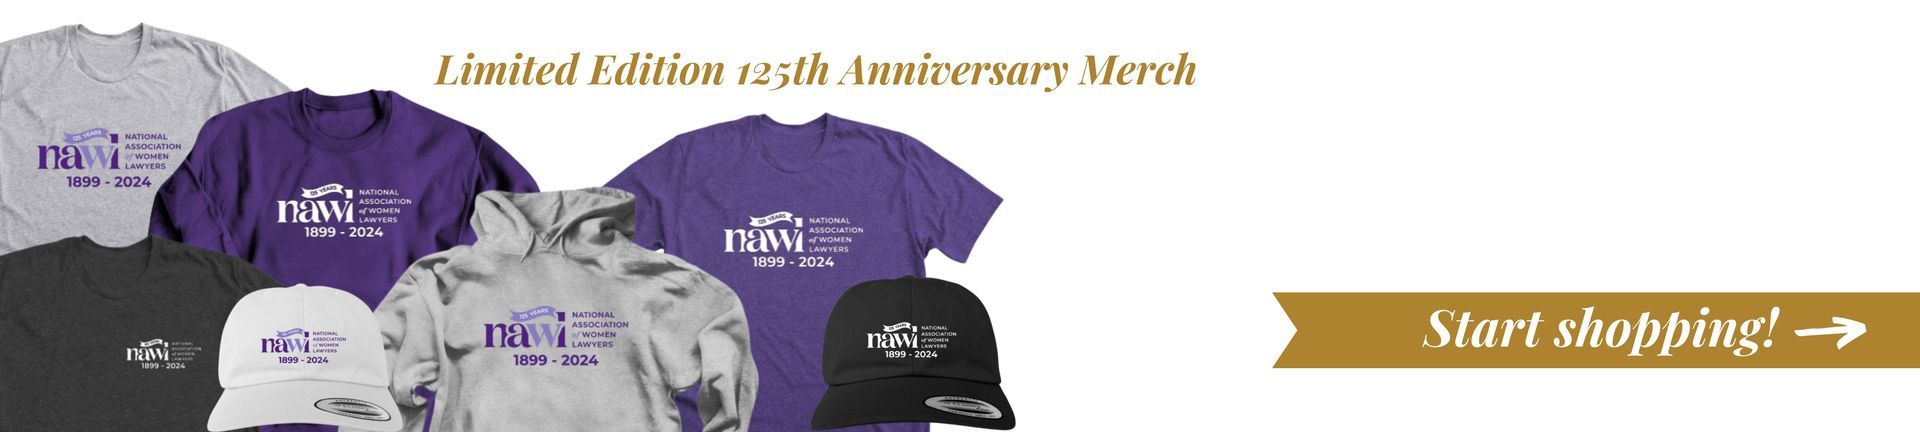 Collection of apparel with the NAWL 125th anniversary logo